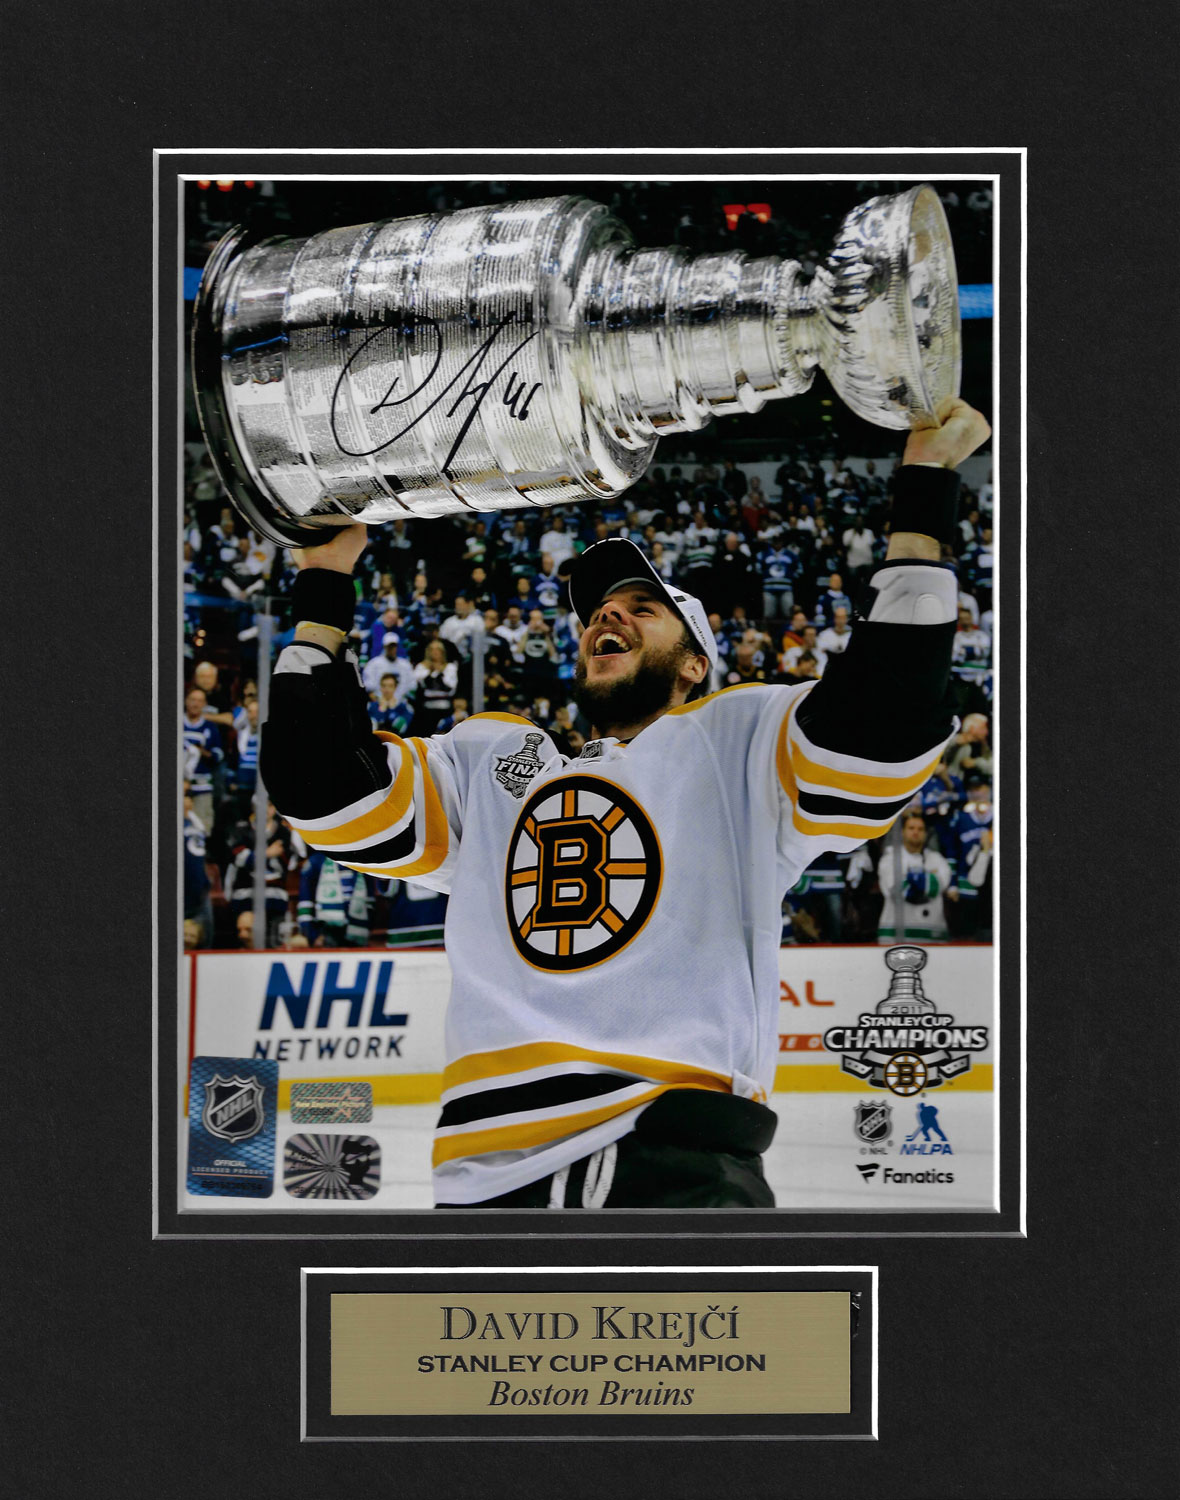 Brad Marchand and David Pastrnak Signed / Autographed Photo 16x20 Frame